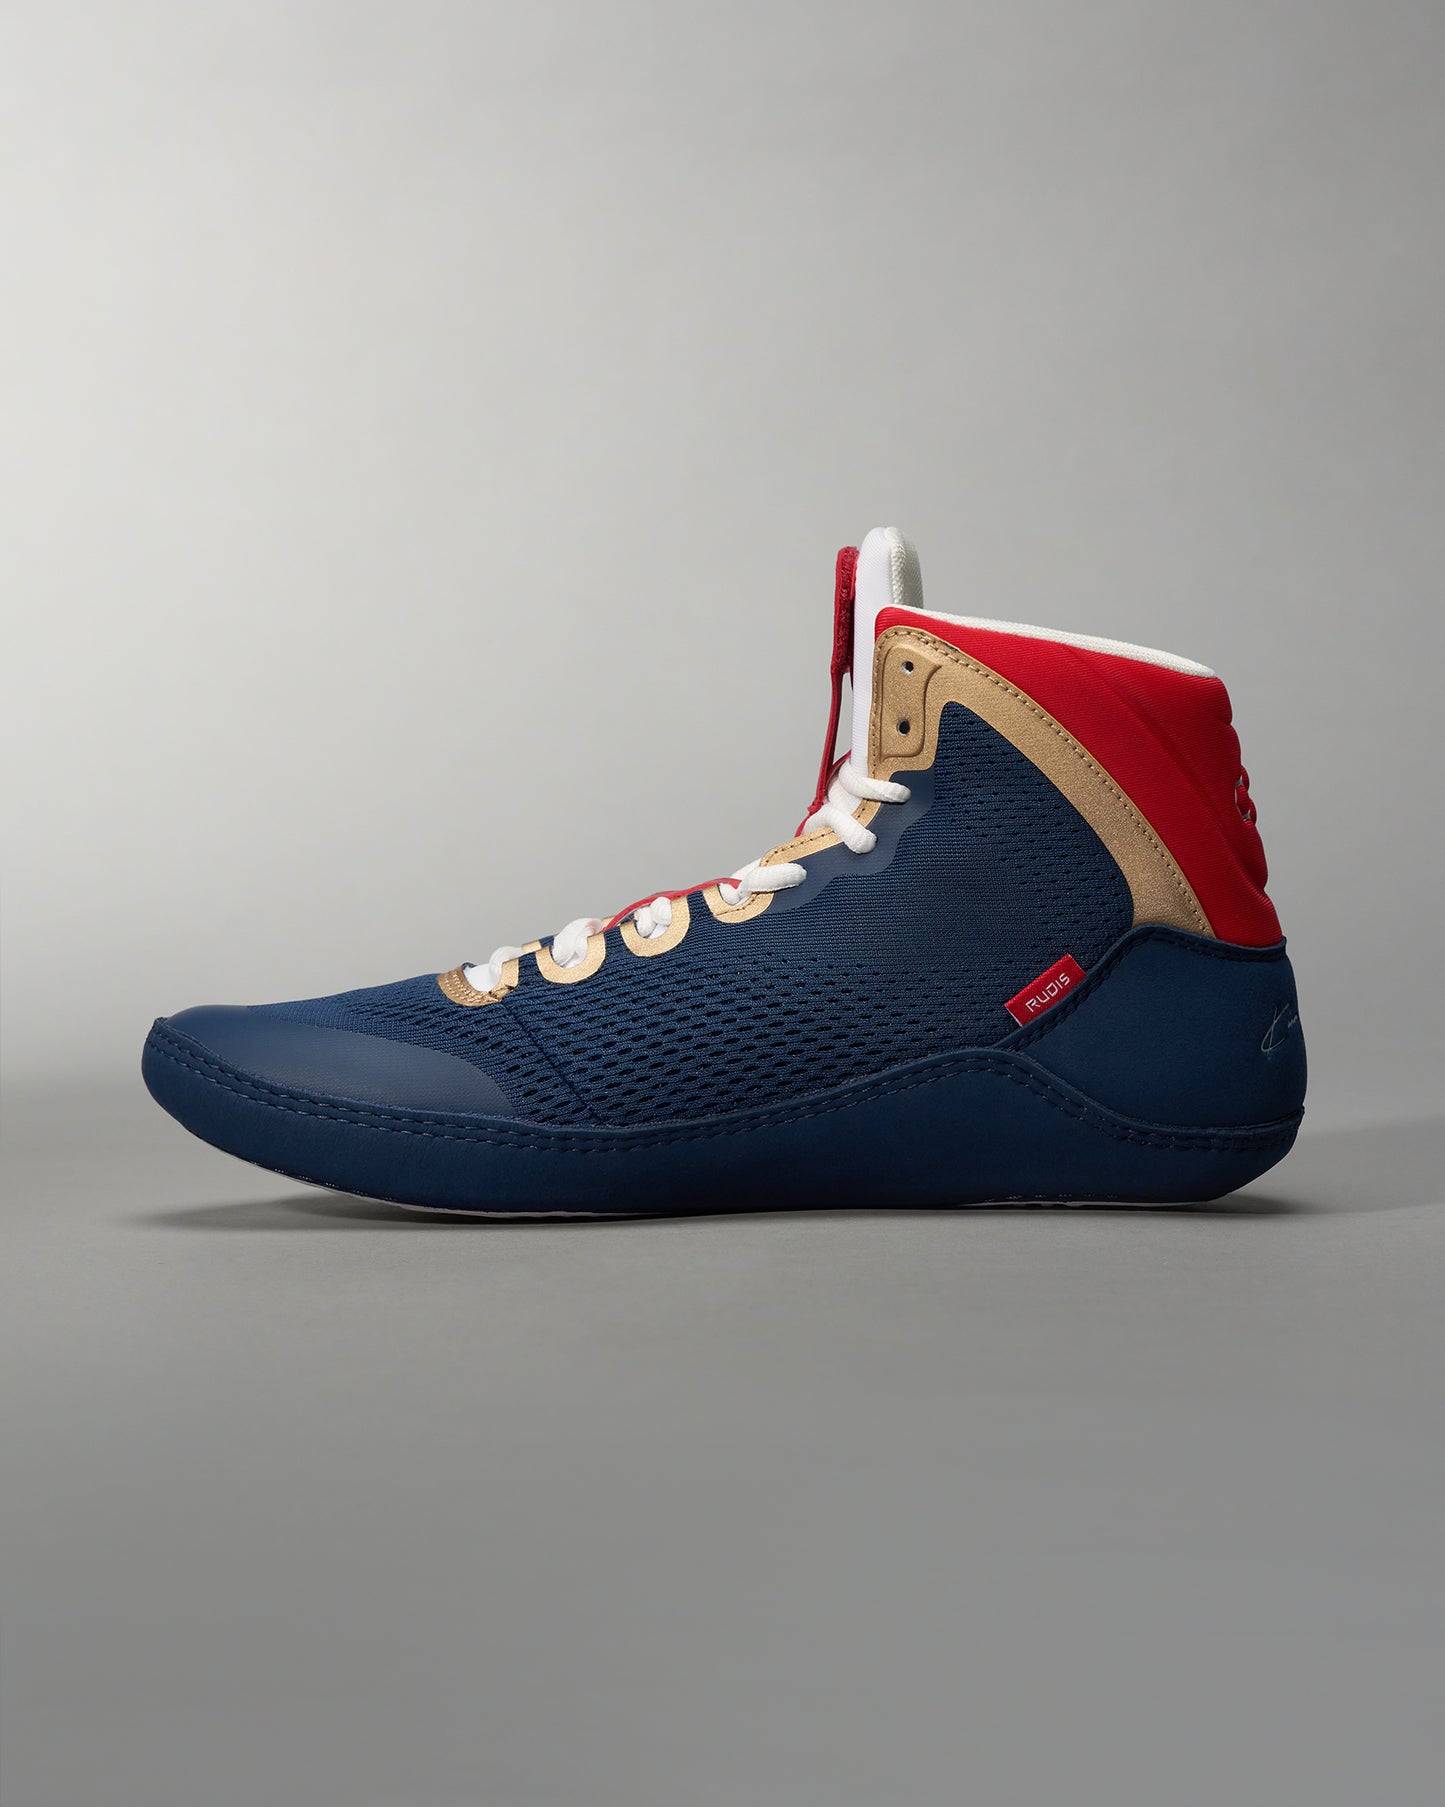 Kenny Monday 1988 Adult Wrestling Shoes - USA Gold